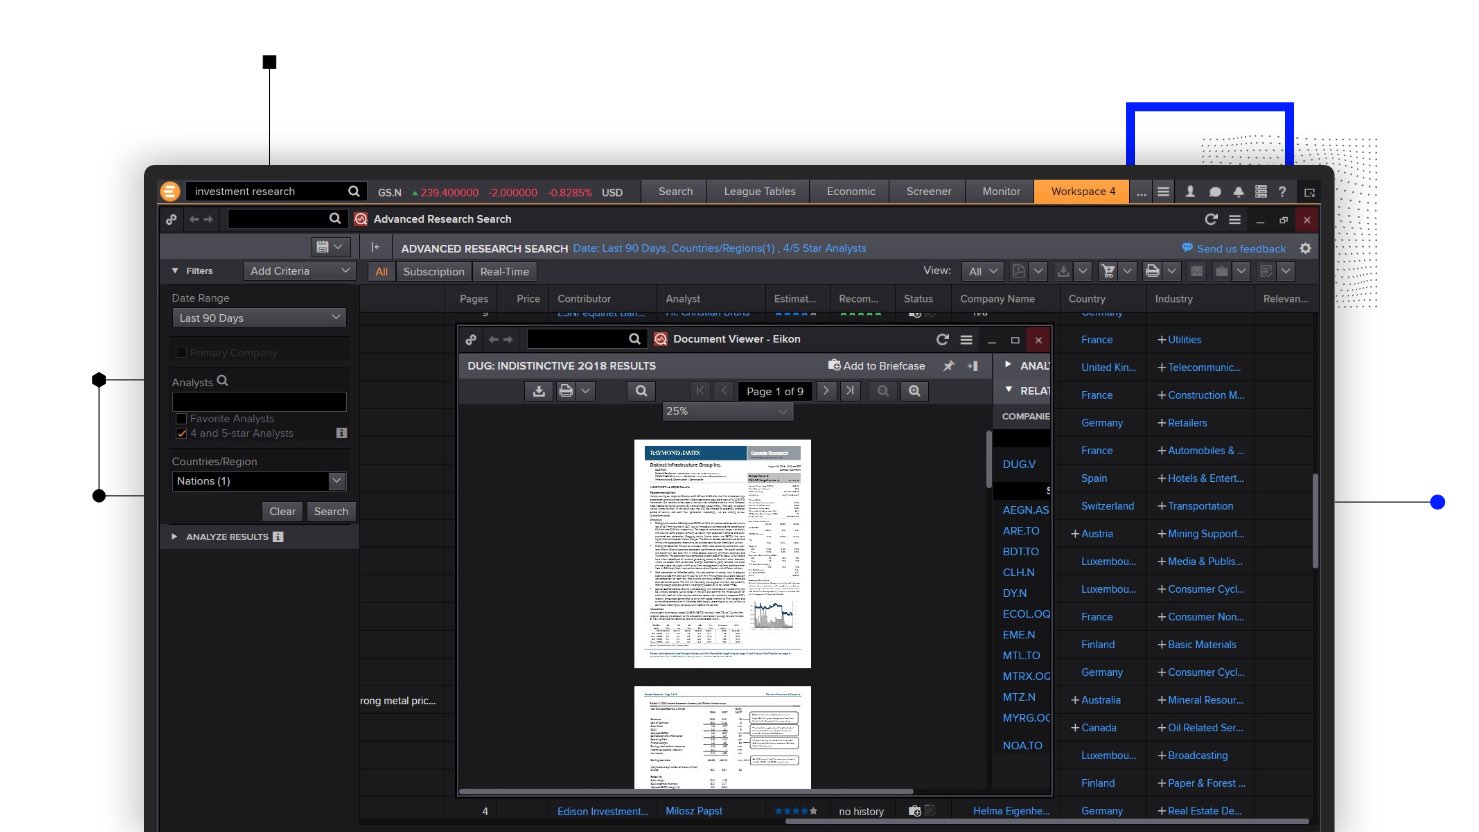 	Screenshot of the advanced Research Search app in Eikon